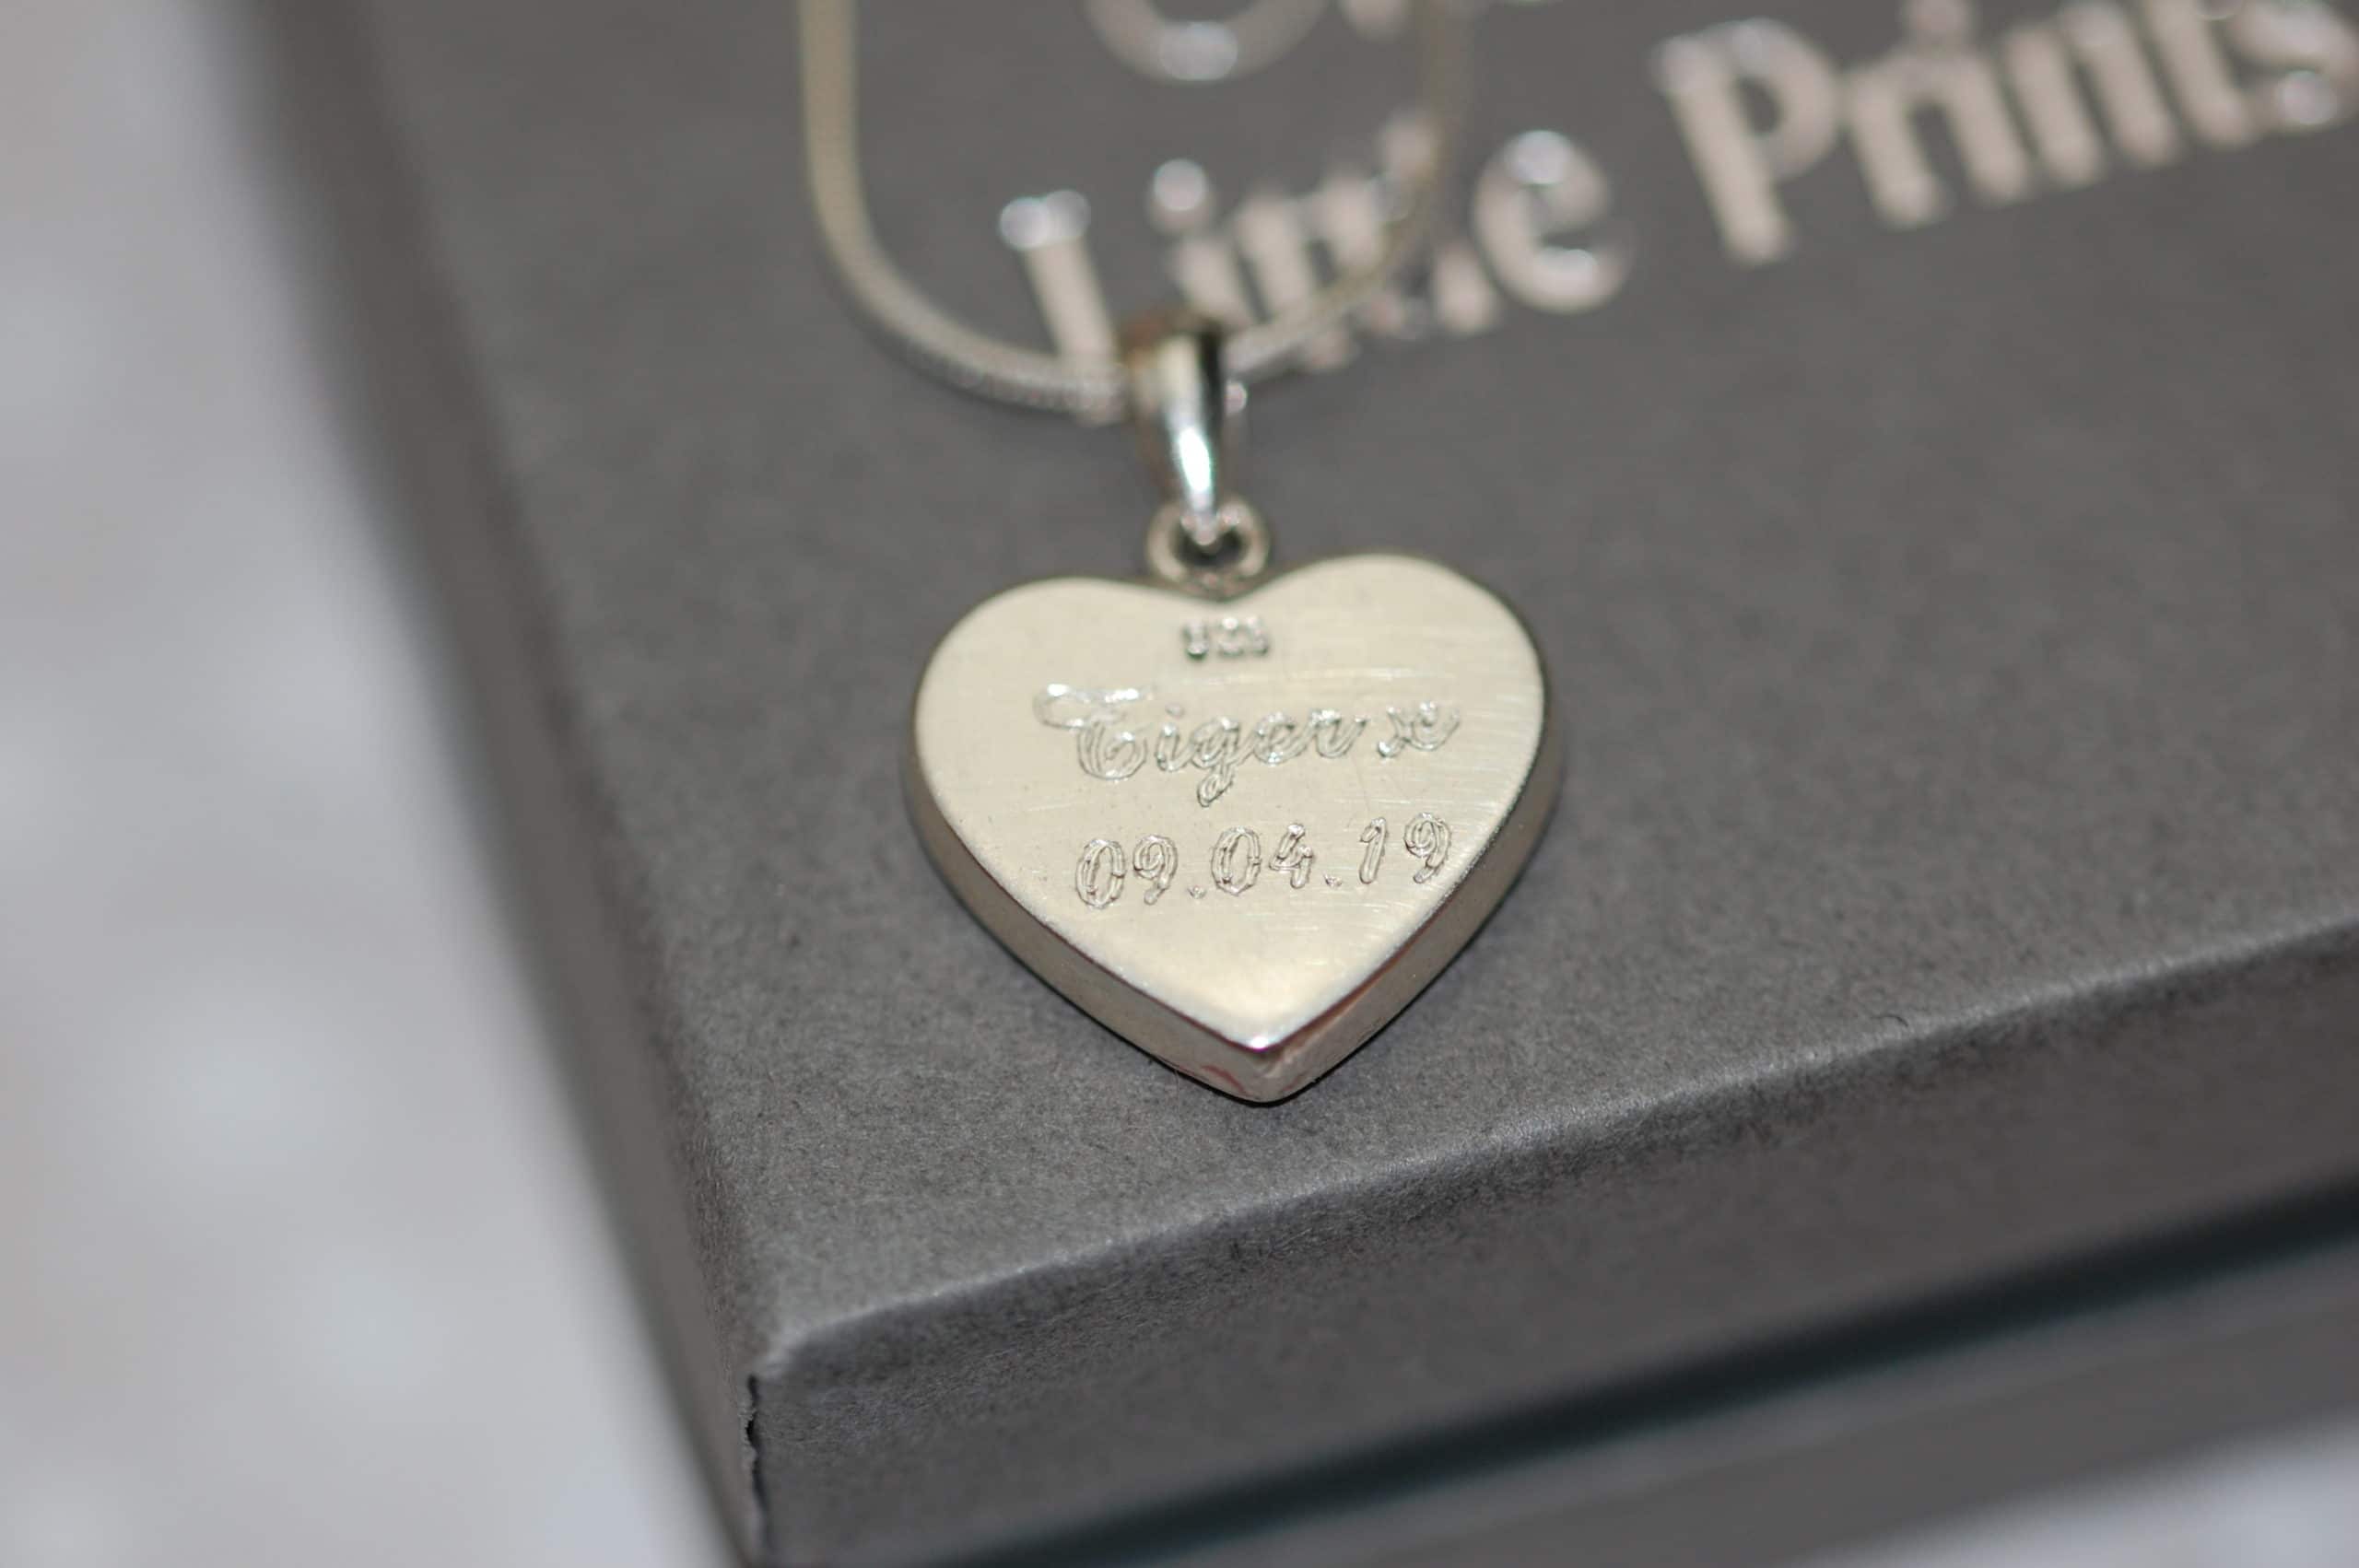 Pet name and date engraved on the back of silver heart pendant with pet fur or cremation ashes